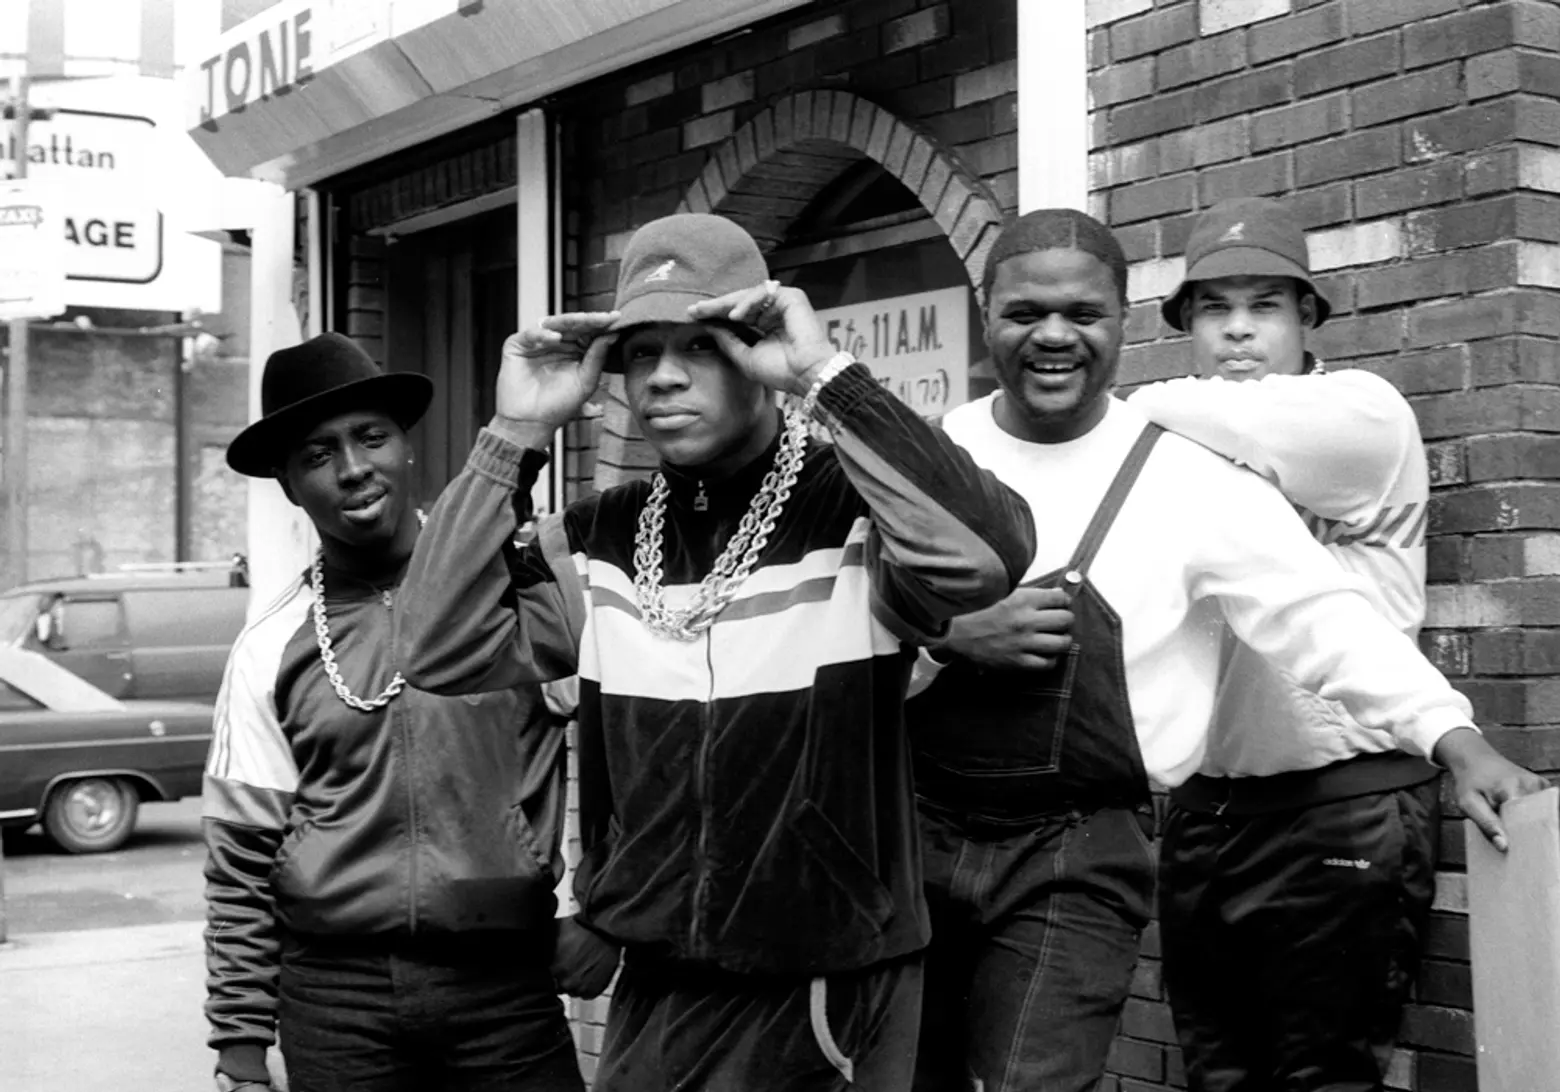 LL Cool J with Cut Creator, E-Love, and B-Rock. 1986. Photographer: Janette Beckman 